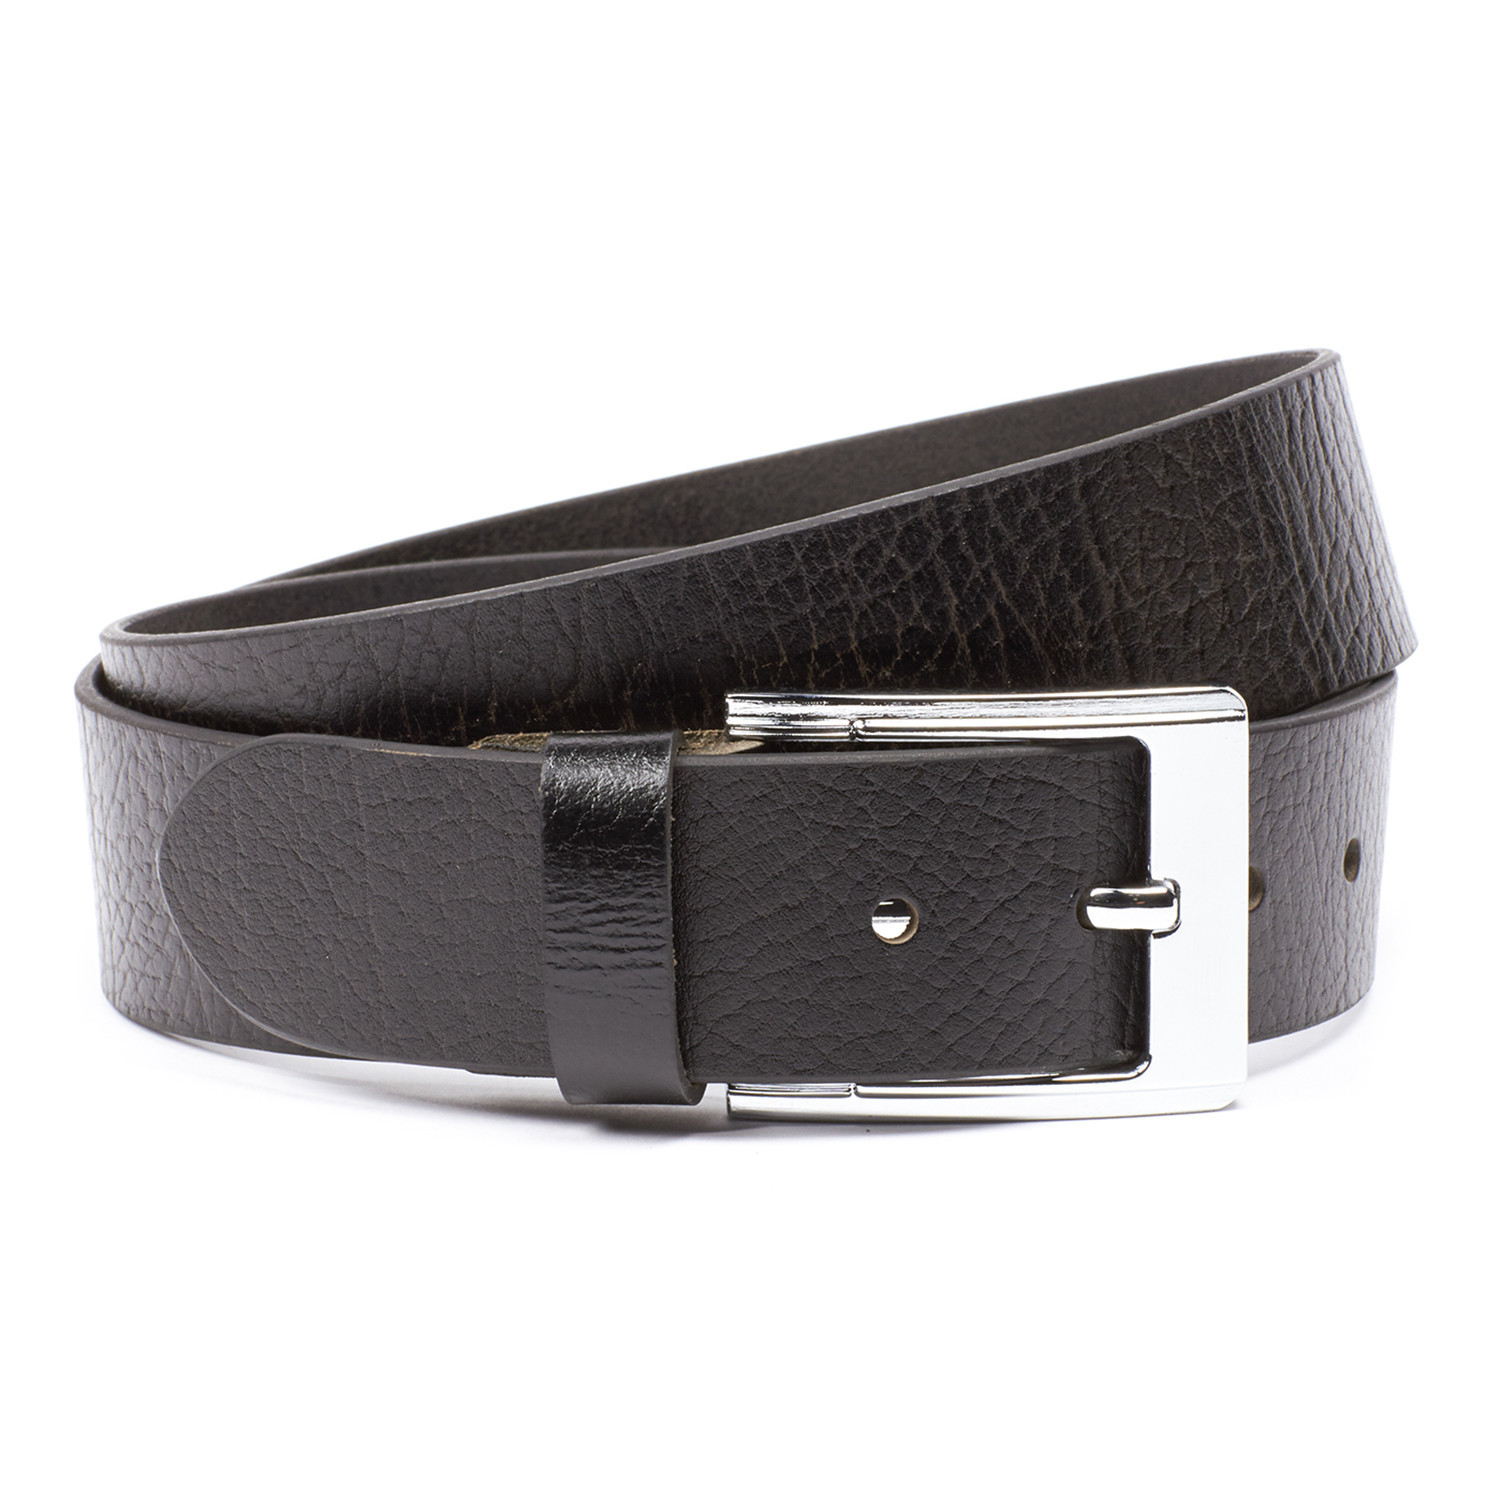 The King Belt // Black (S) - Souled Out Belt - Touch of Modern